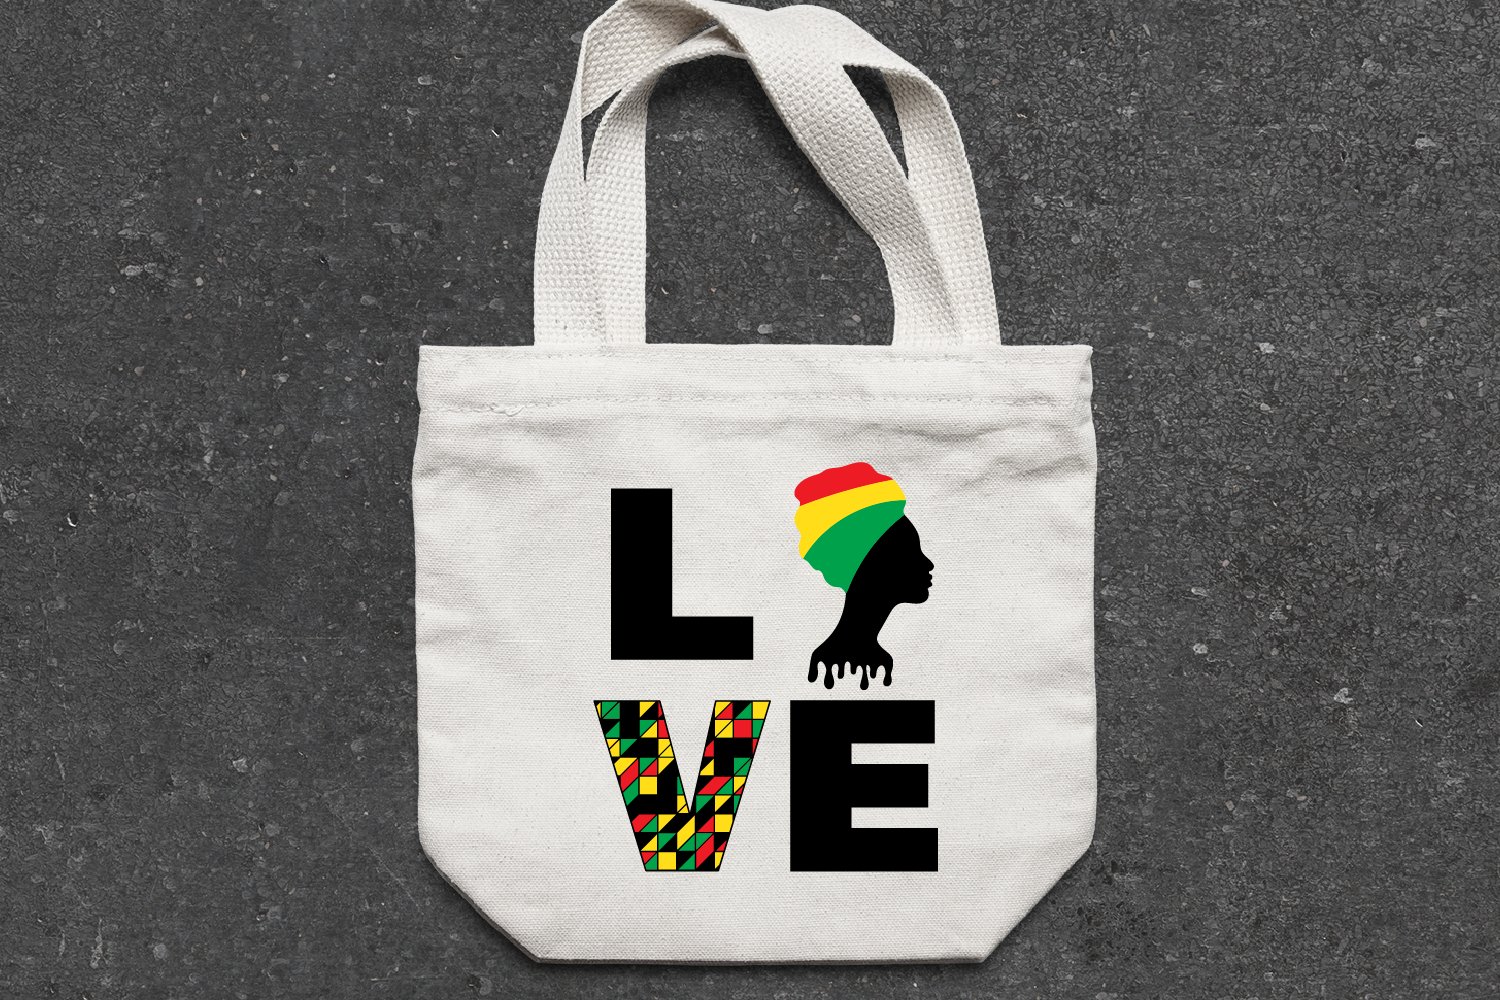 White bag with colorful print "Love" in black.